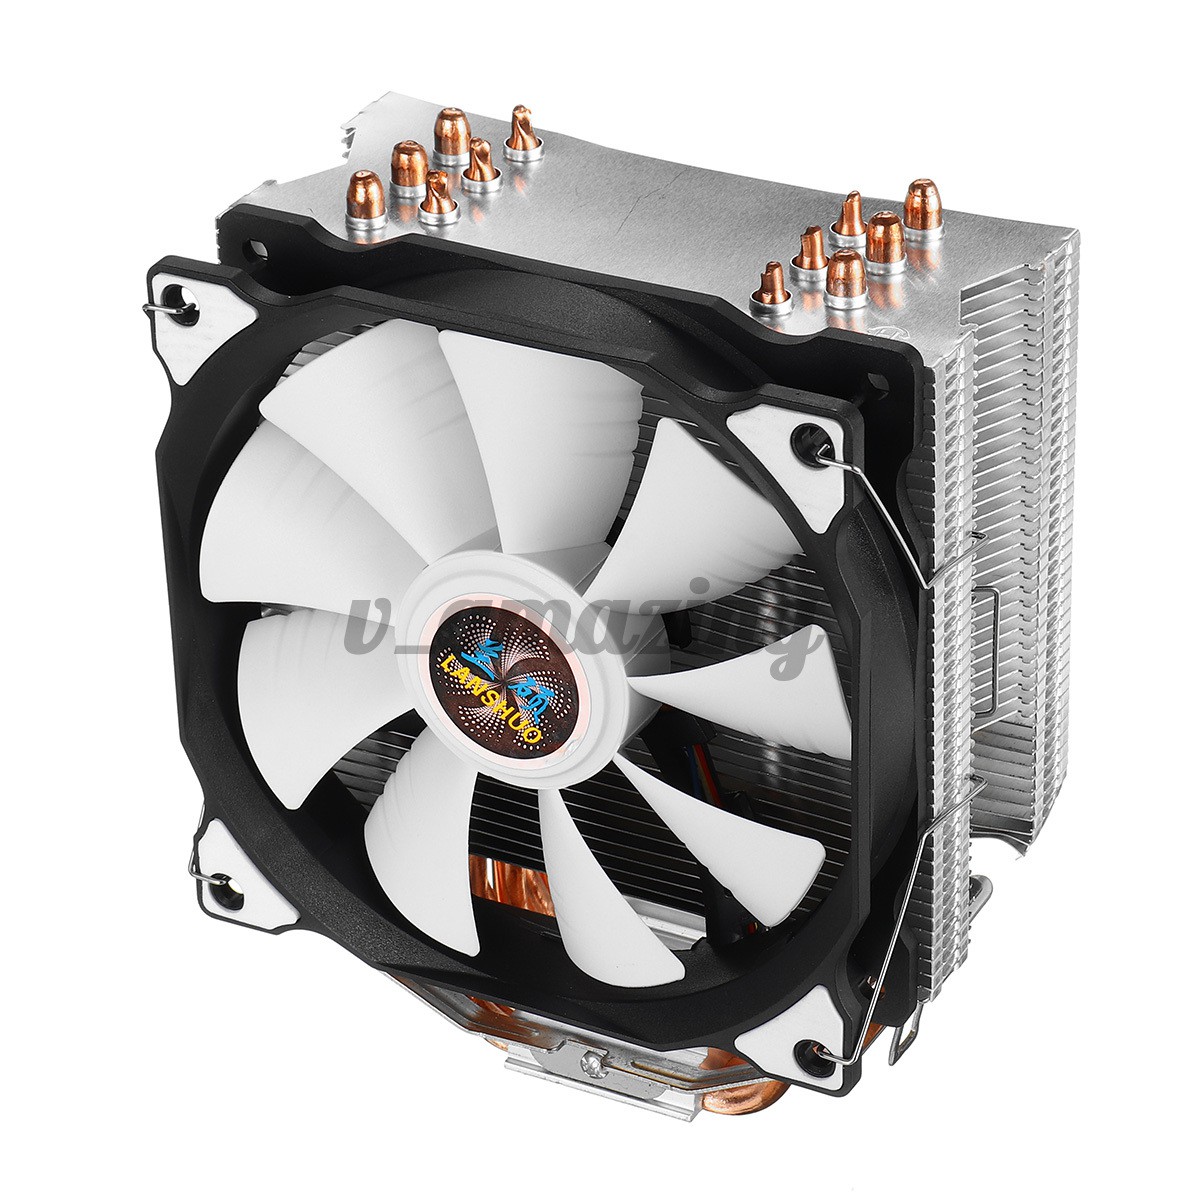 CPU Cooler 4Pin  6 Heatpipes 120mm Fan Cooling For LGA 775/115X//1366 and AMD